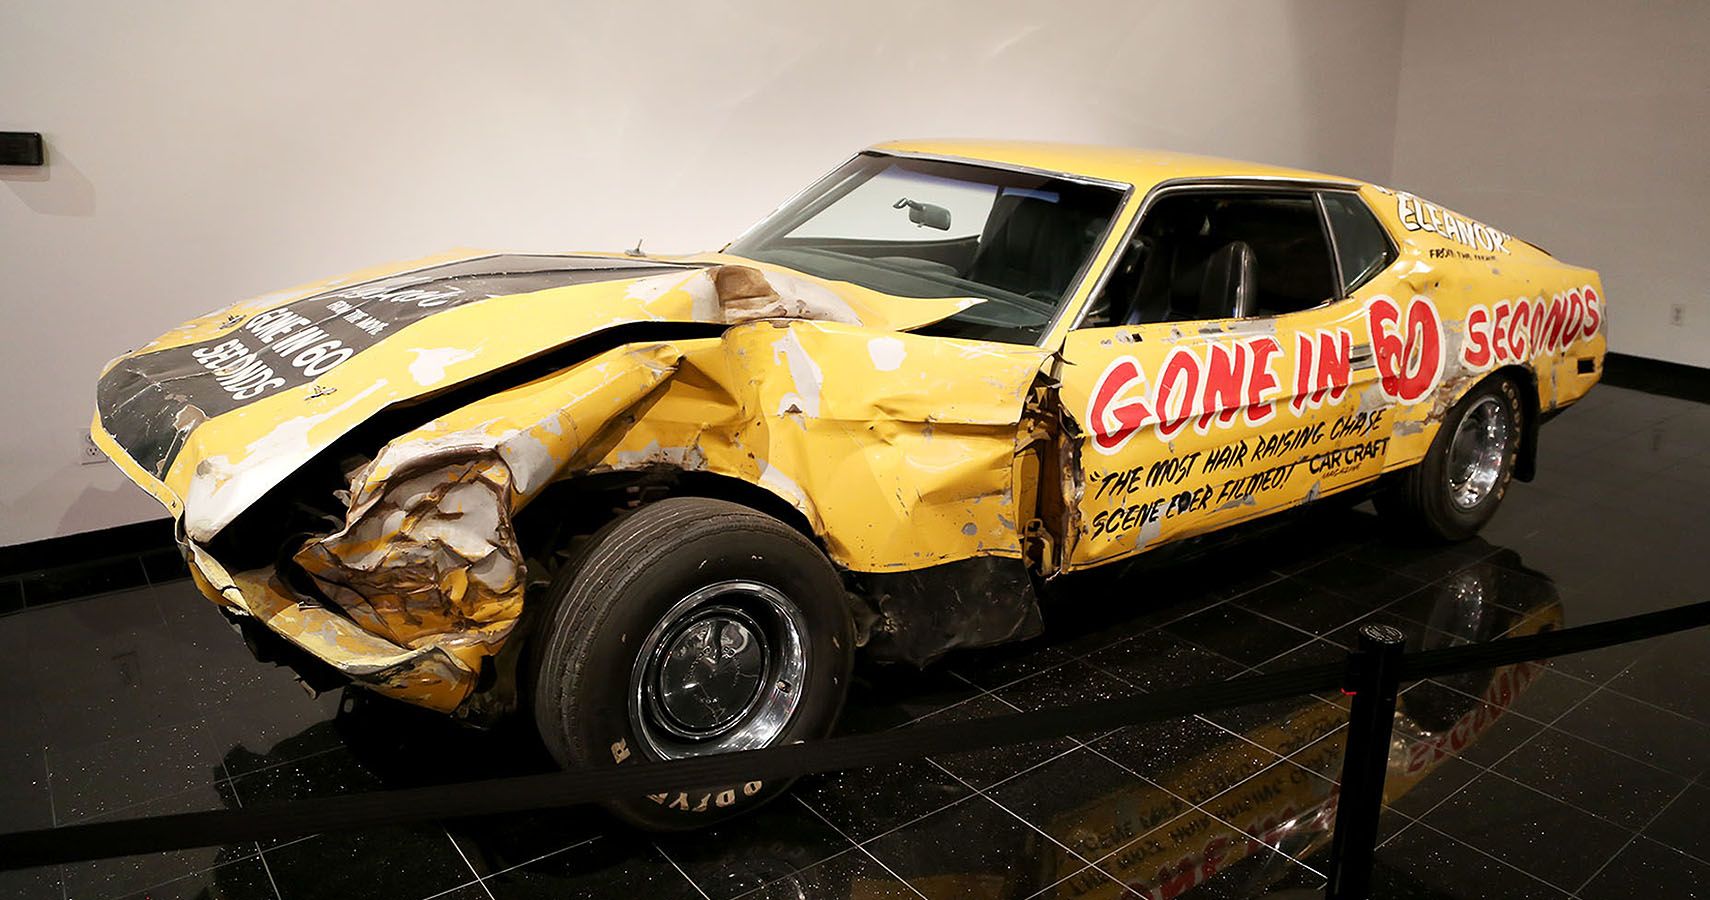 The 1971 Yellow Eleanor Mustang In Gone In 60 Seconds (1974) Still Survives, And It Is Halicki’s Widow, Denice Shakarian Halicki, Who Owns The Bashed-Up Car That Has Been Loaned To The Likes Of Peterson Museum During Mustang Show Events